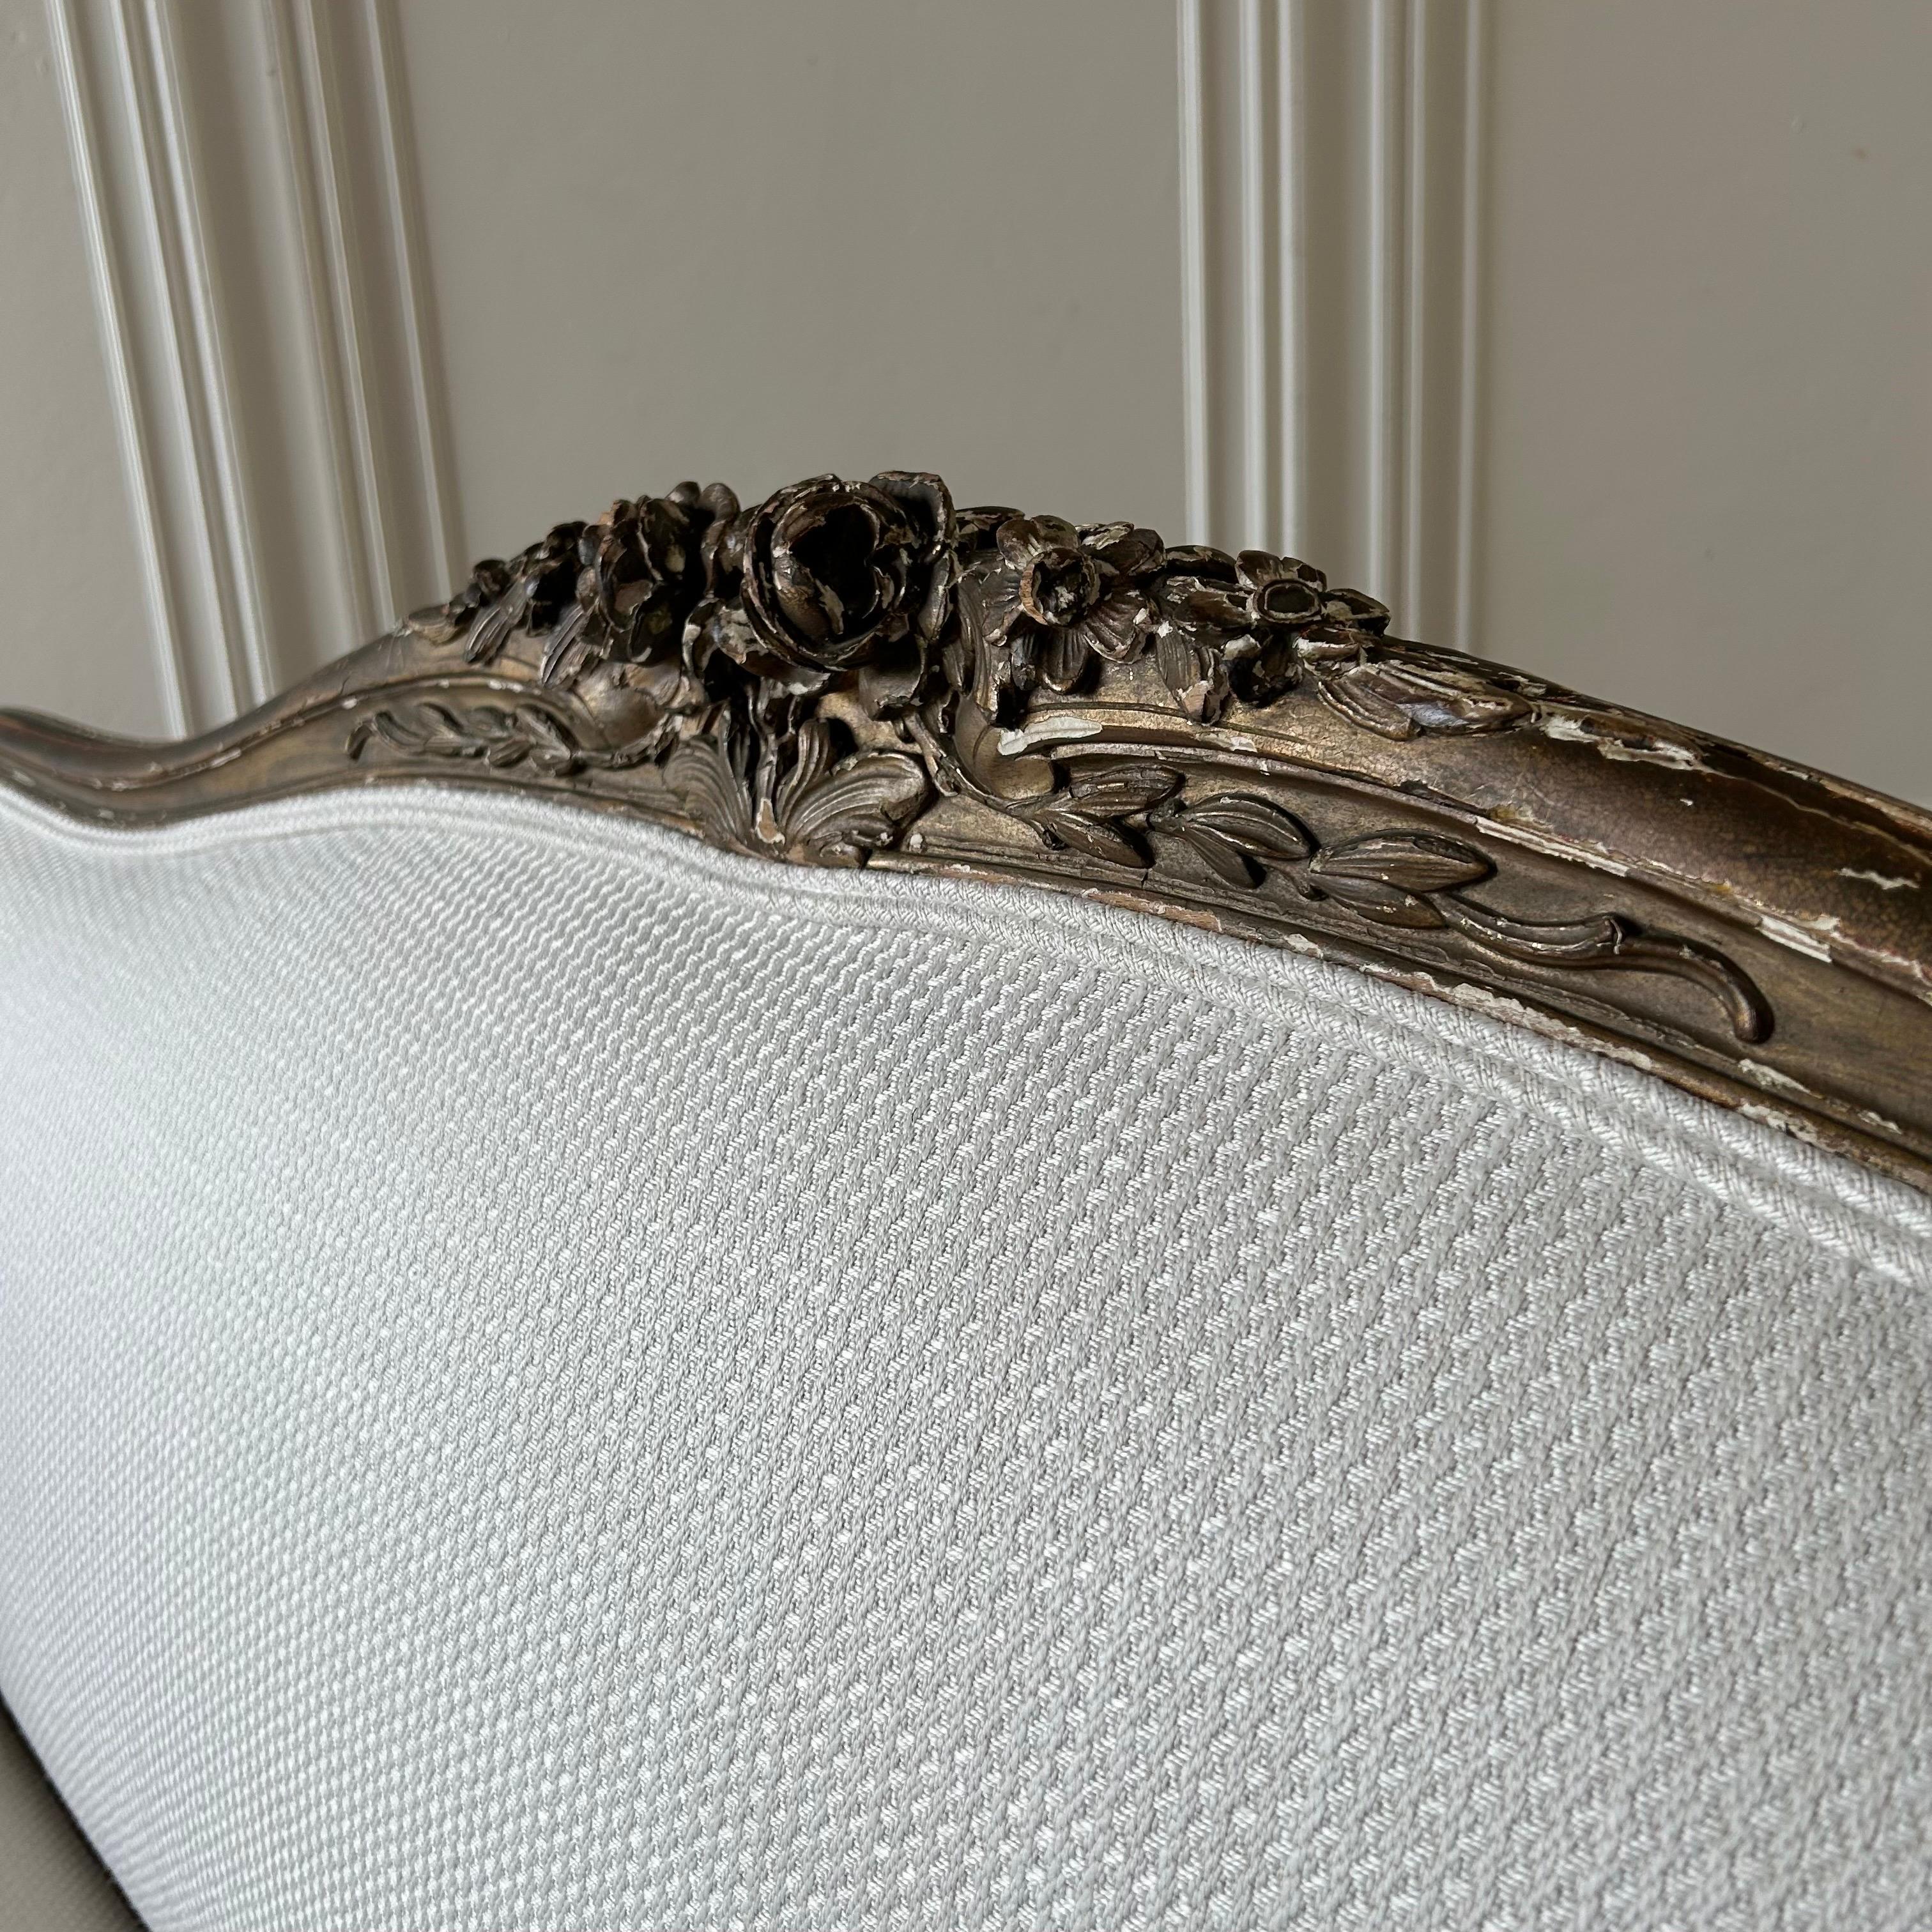 Antique French Gilt Wood Settee Upholstered in Antique White Wool and Cashmere For Sale 15